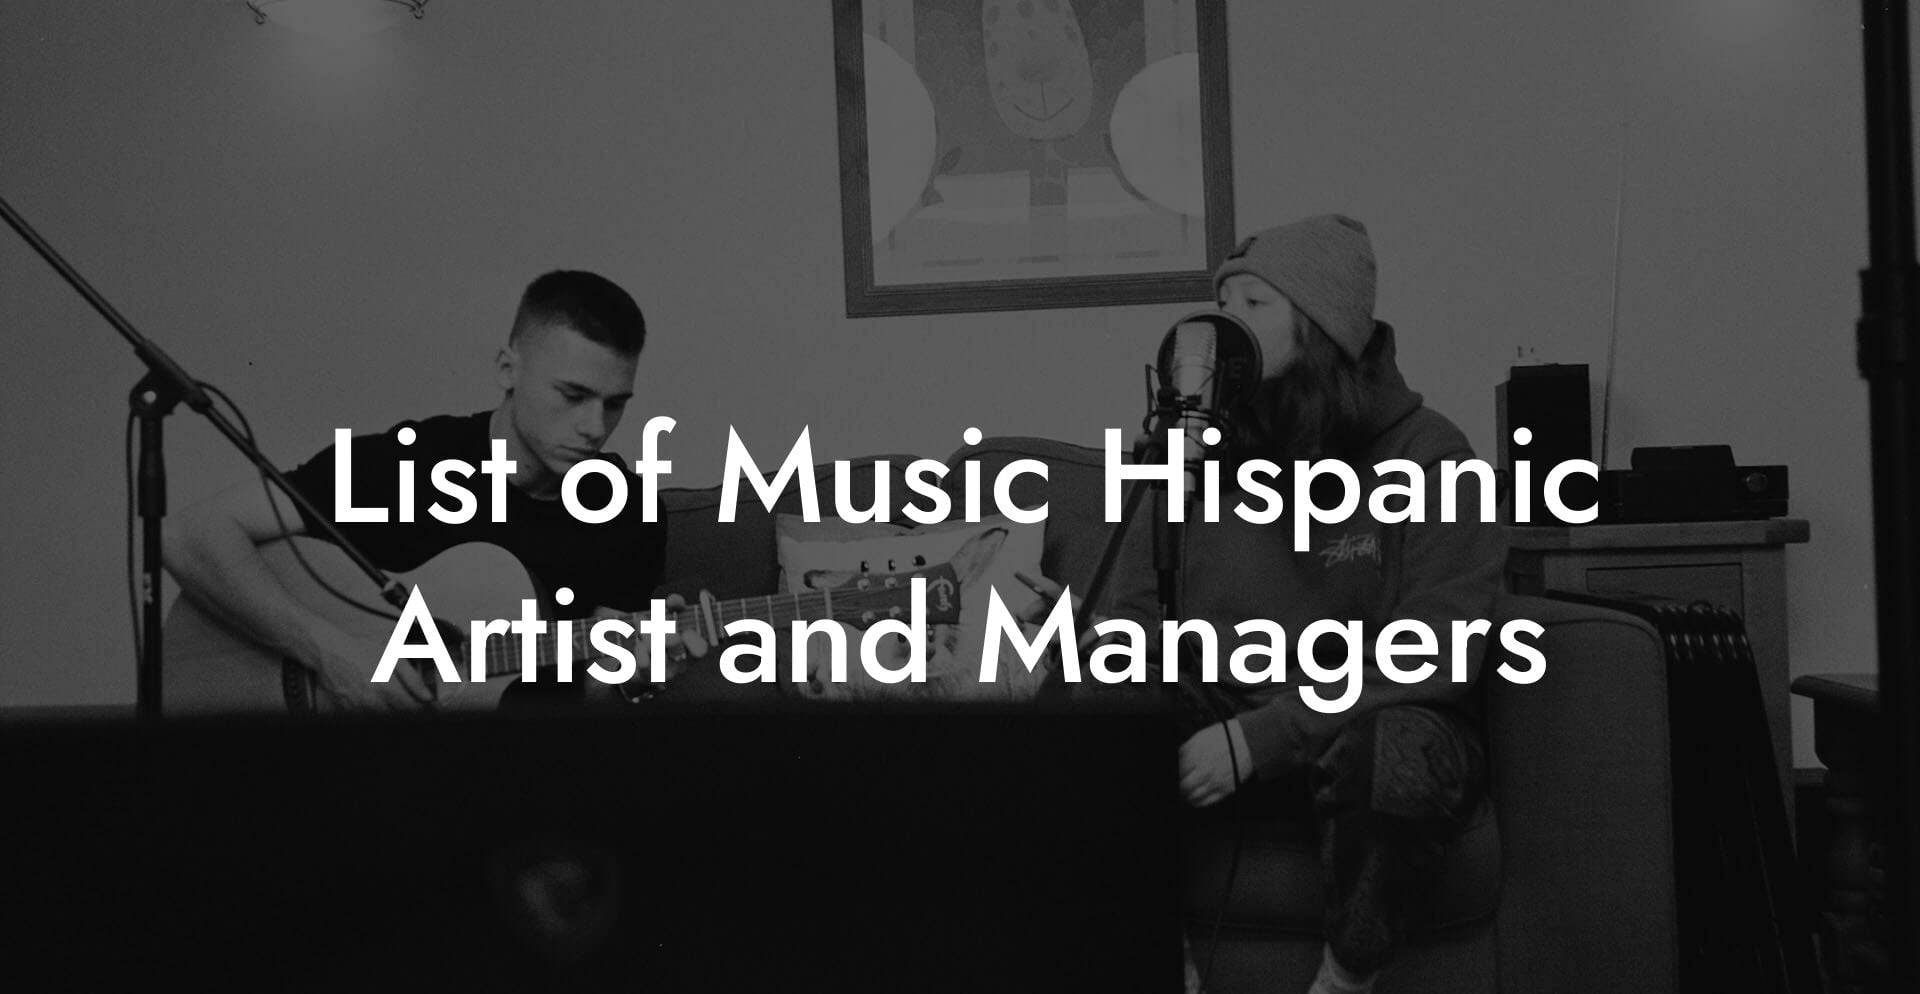 List of Music Hispanic Artist and Managers